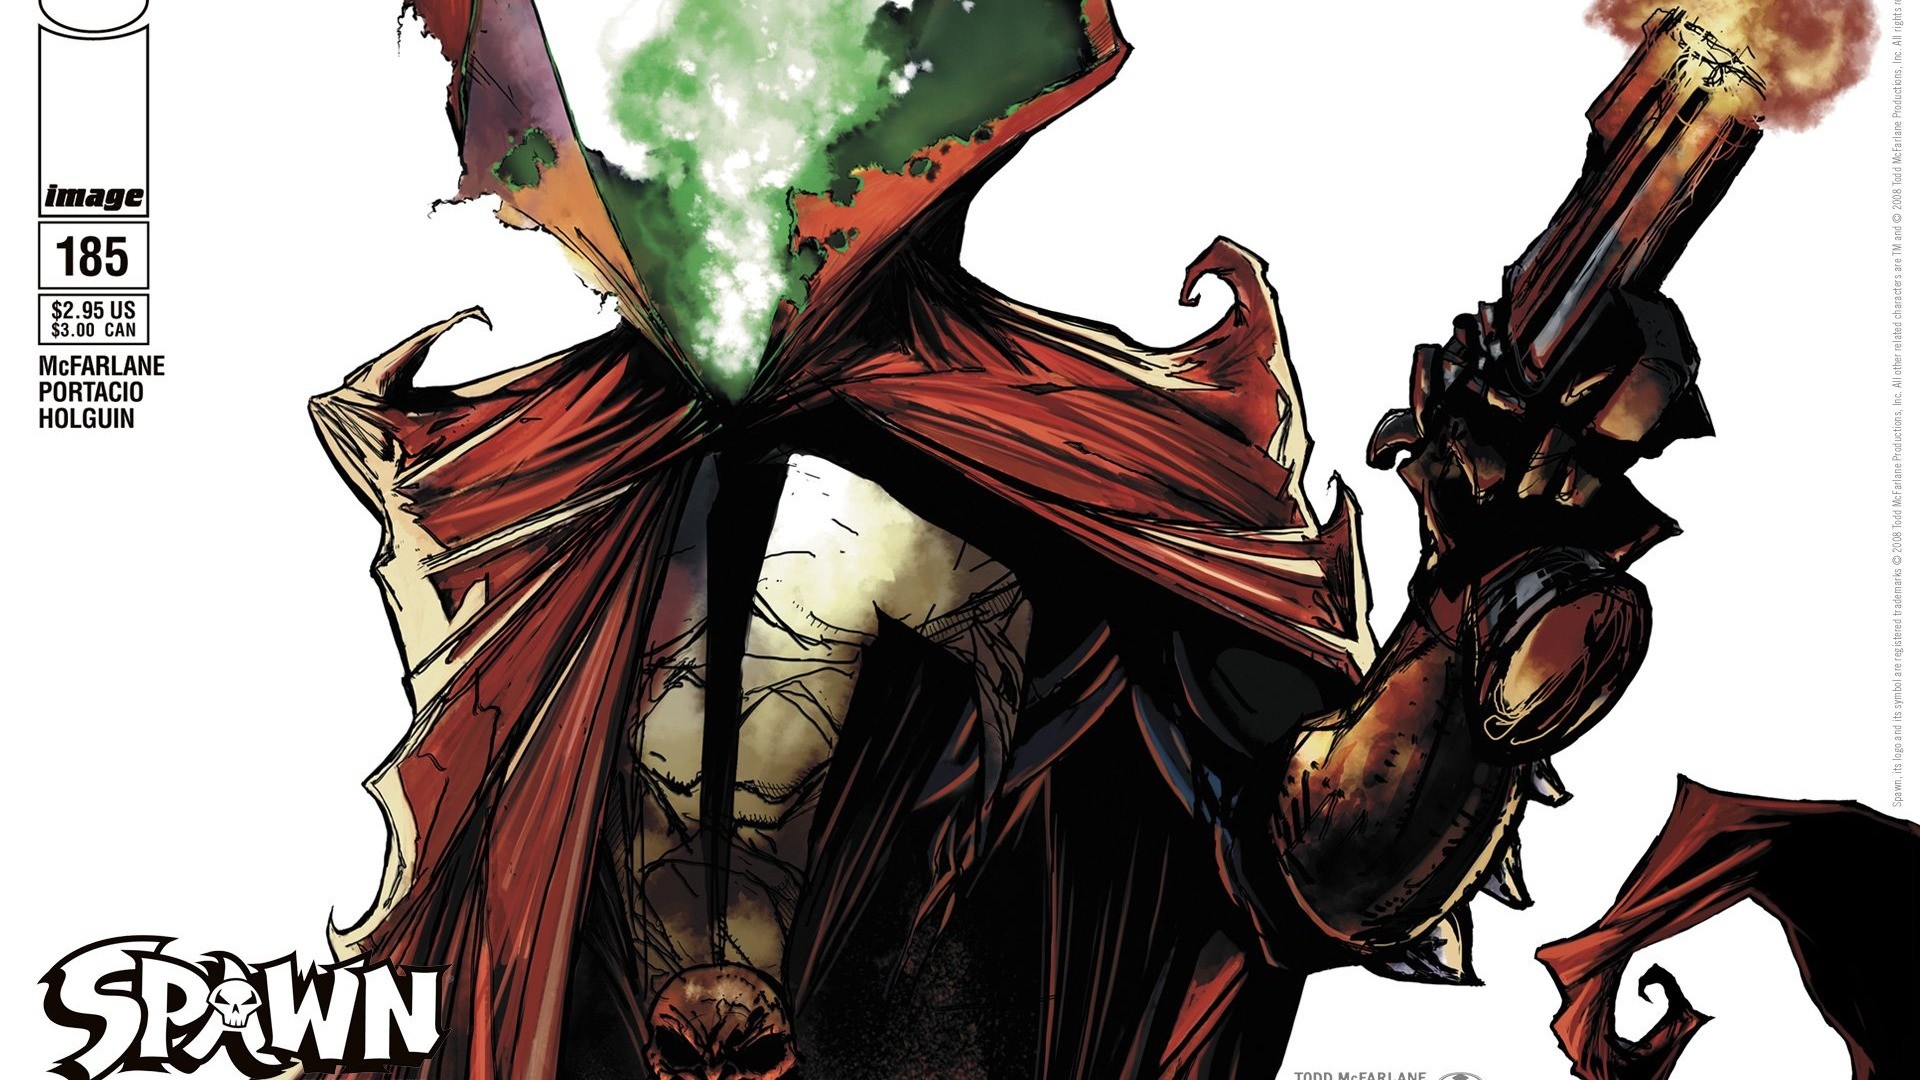 1920x1080 Spawn HD Wallpapers #9 - .